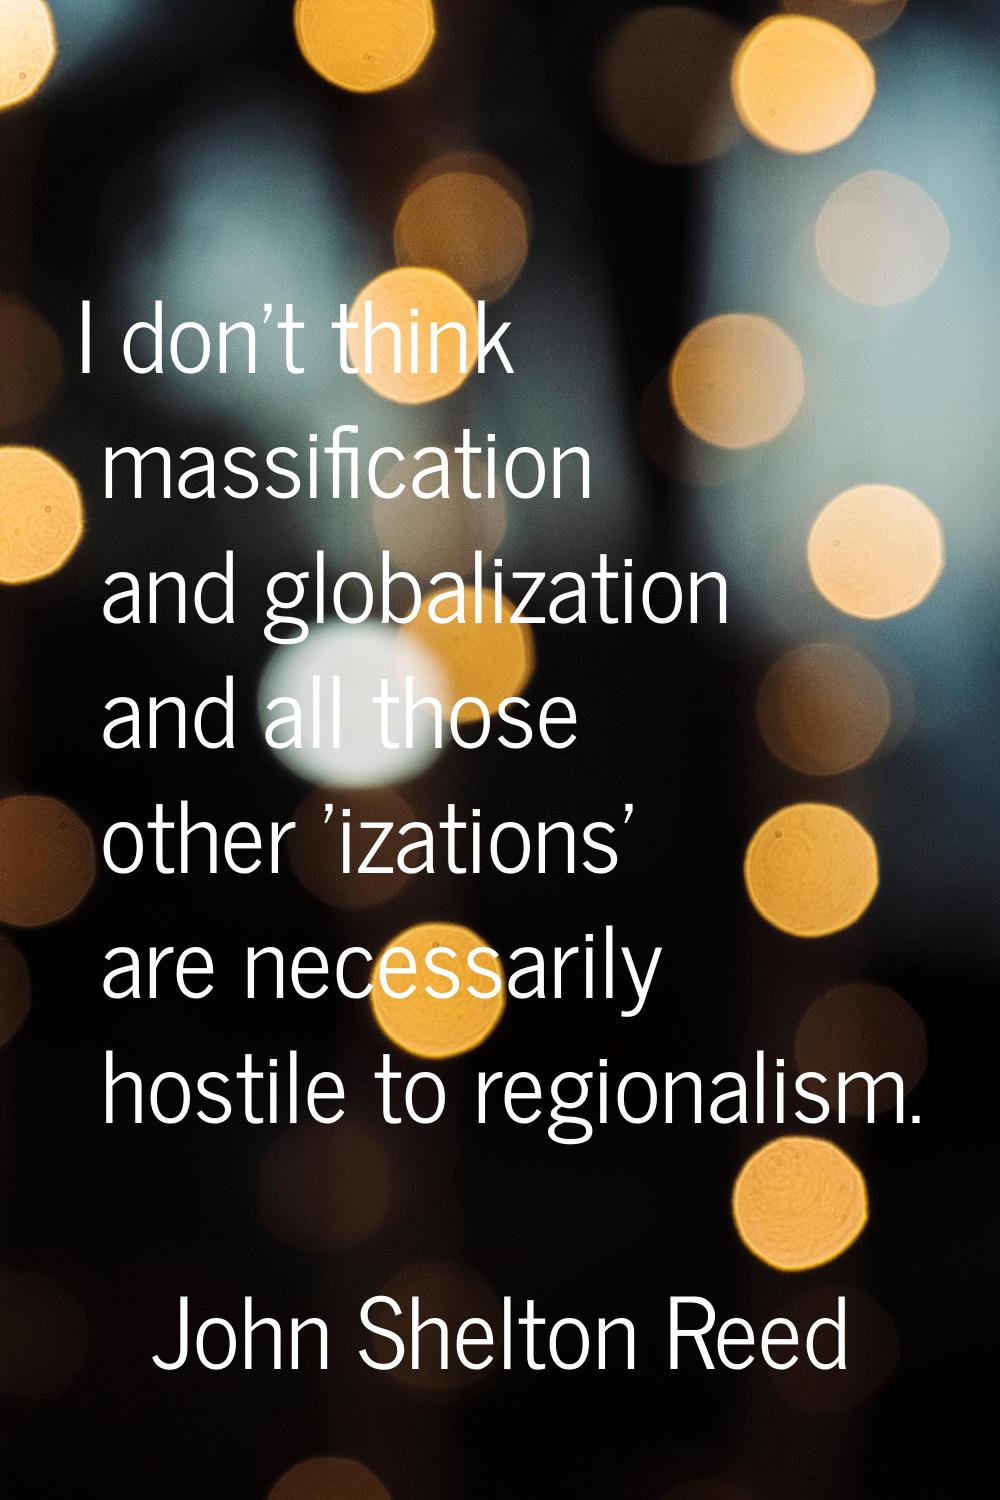 I don't think massification and globalization and all those other 'izations' are necessarily hostil